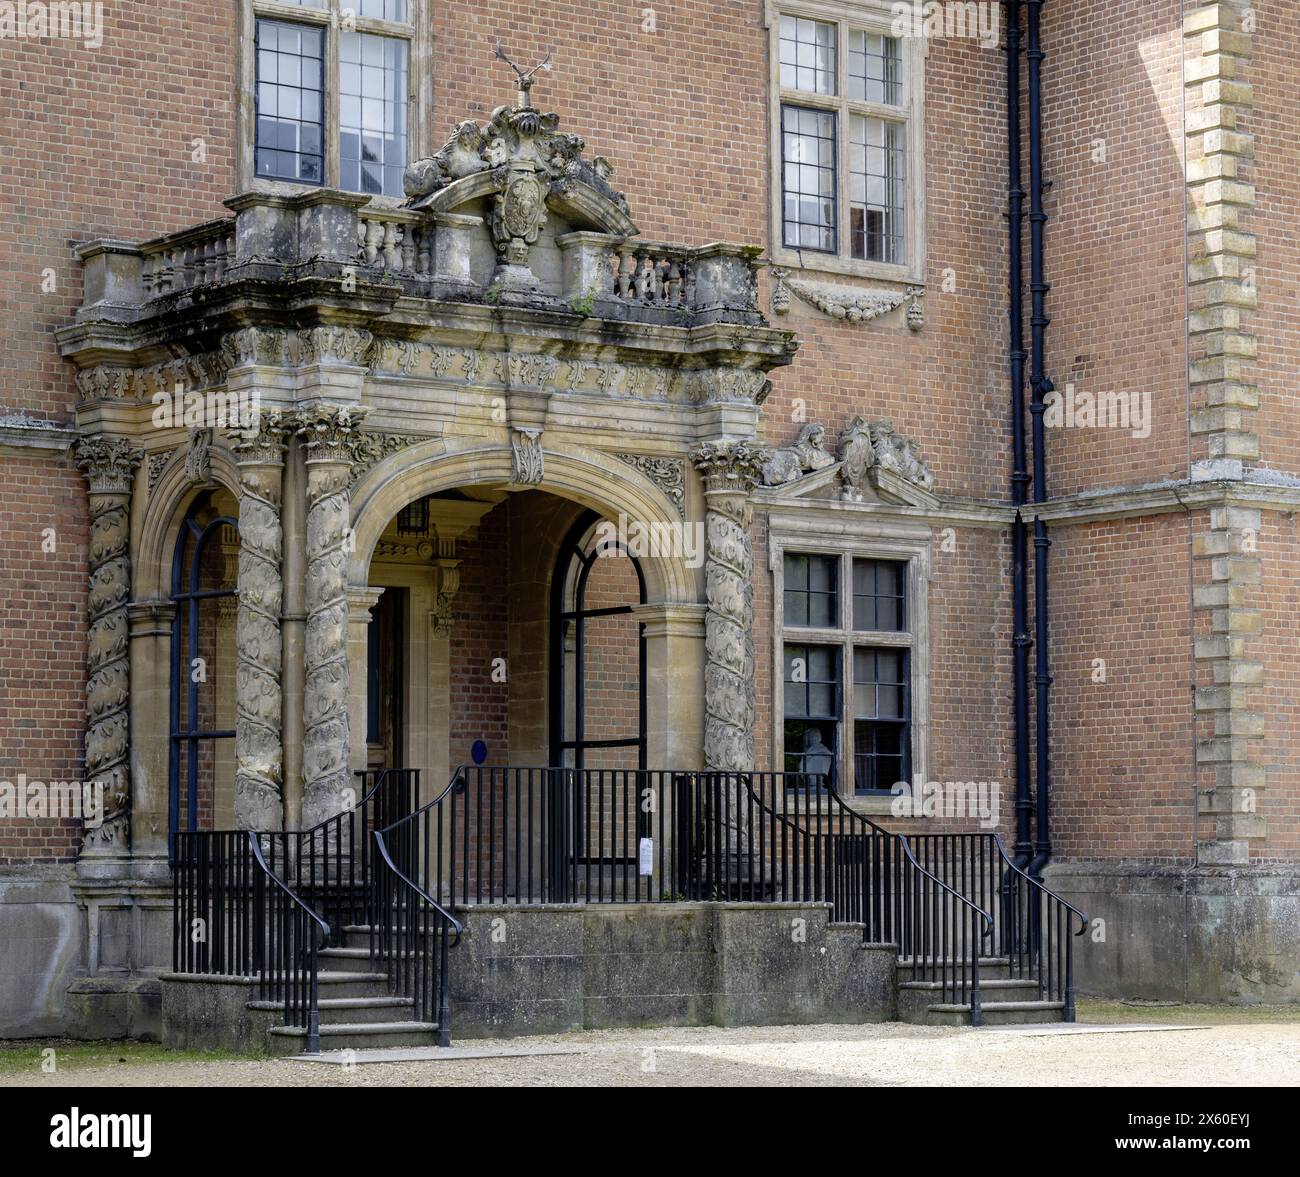 Tredegar House, Coedkernew, Newport, Monmouthshire, South Wales, Wales. UK - view of entrance. Stock Photo